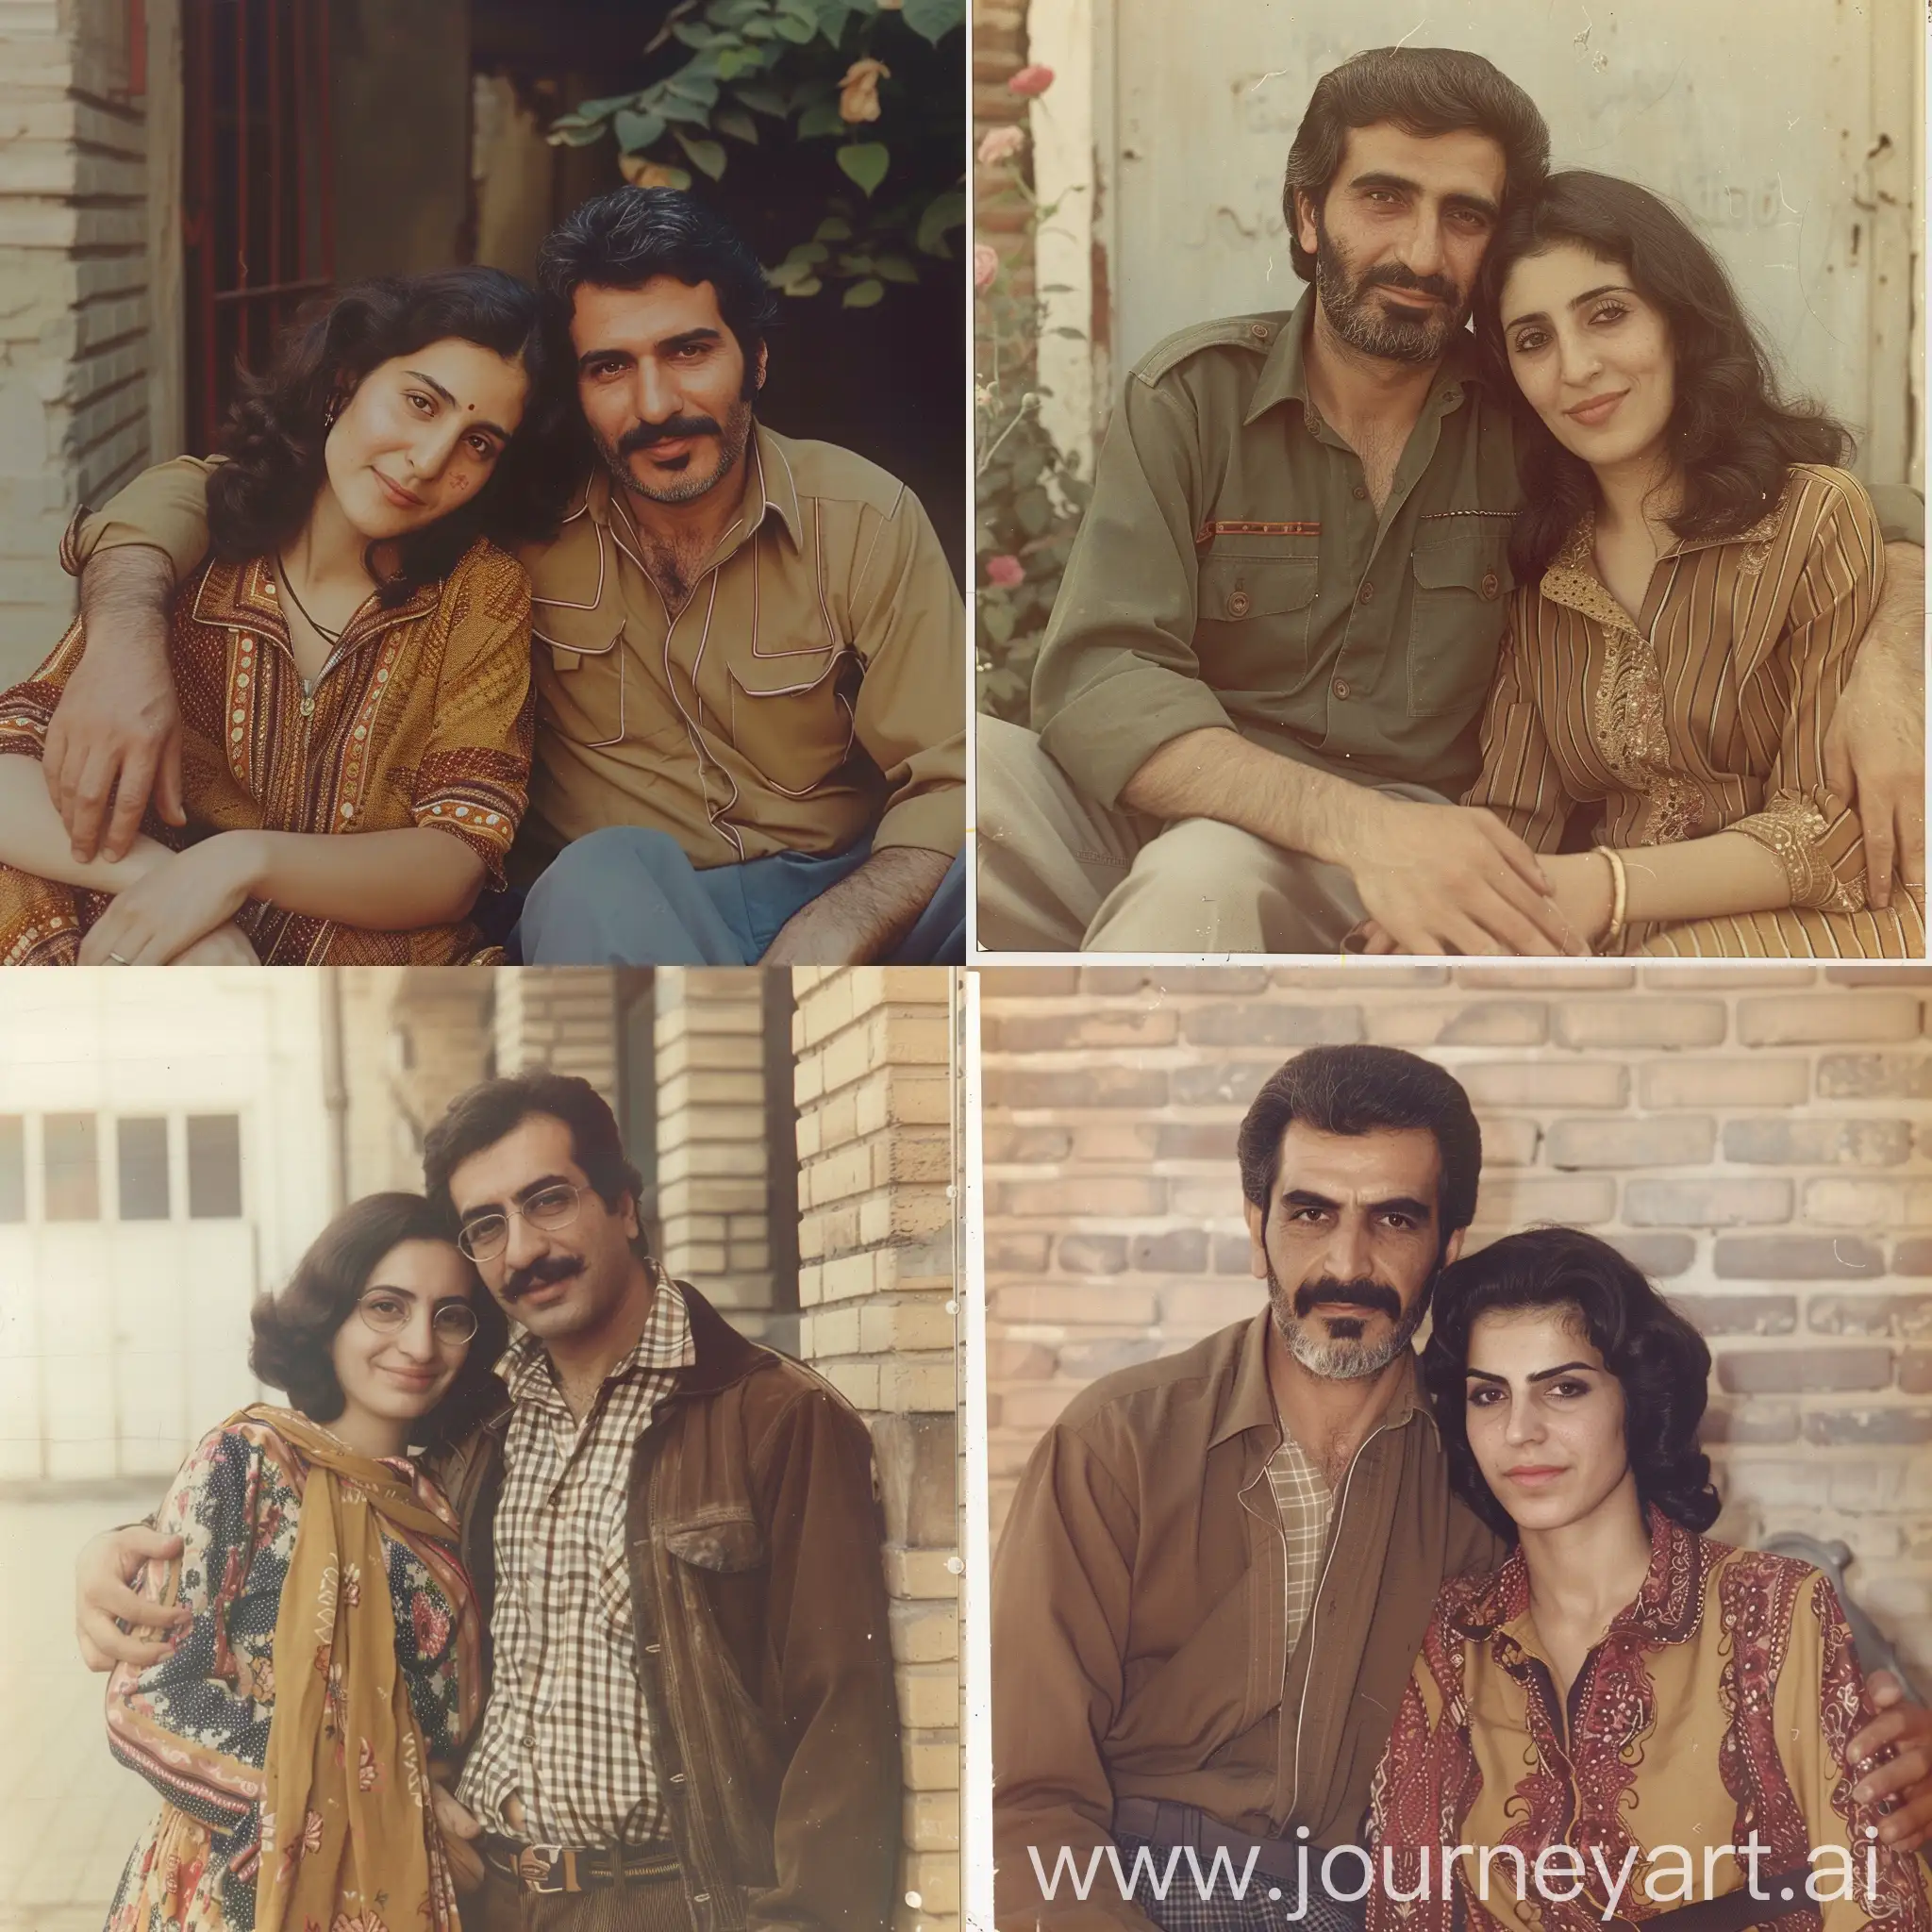 Nostalgic photo of an Iranian man and woman in the 1970s, detailed details. 